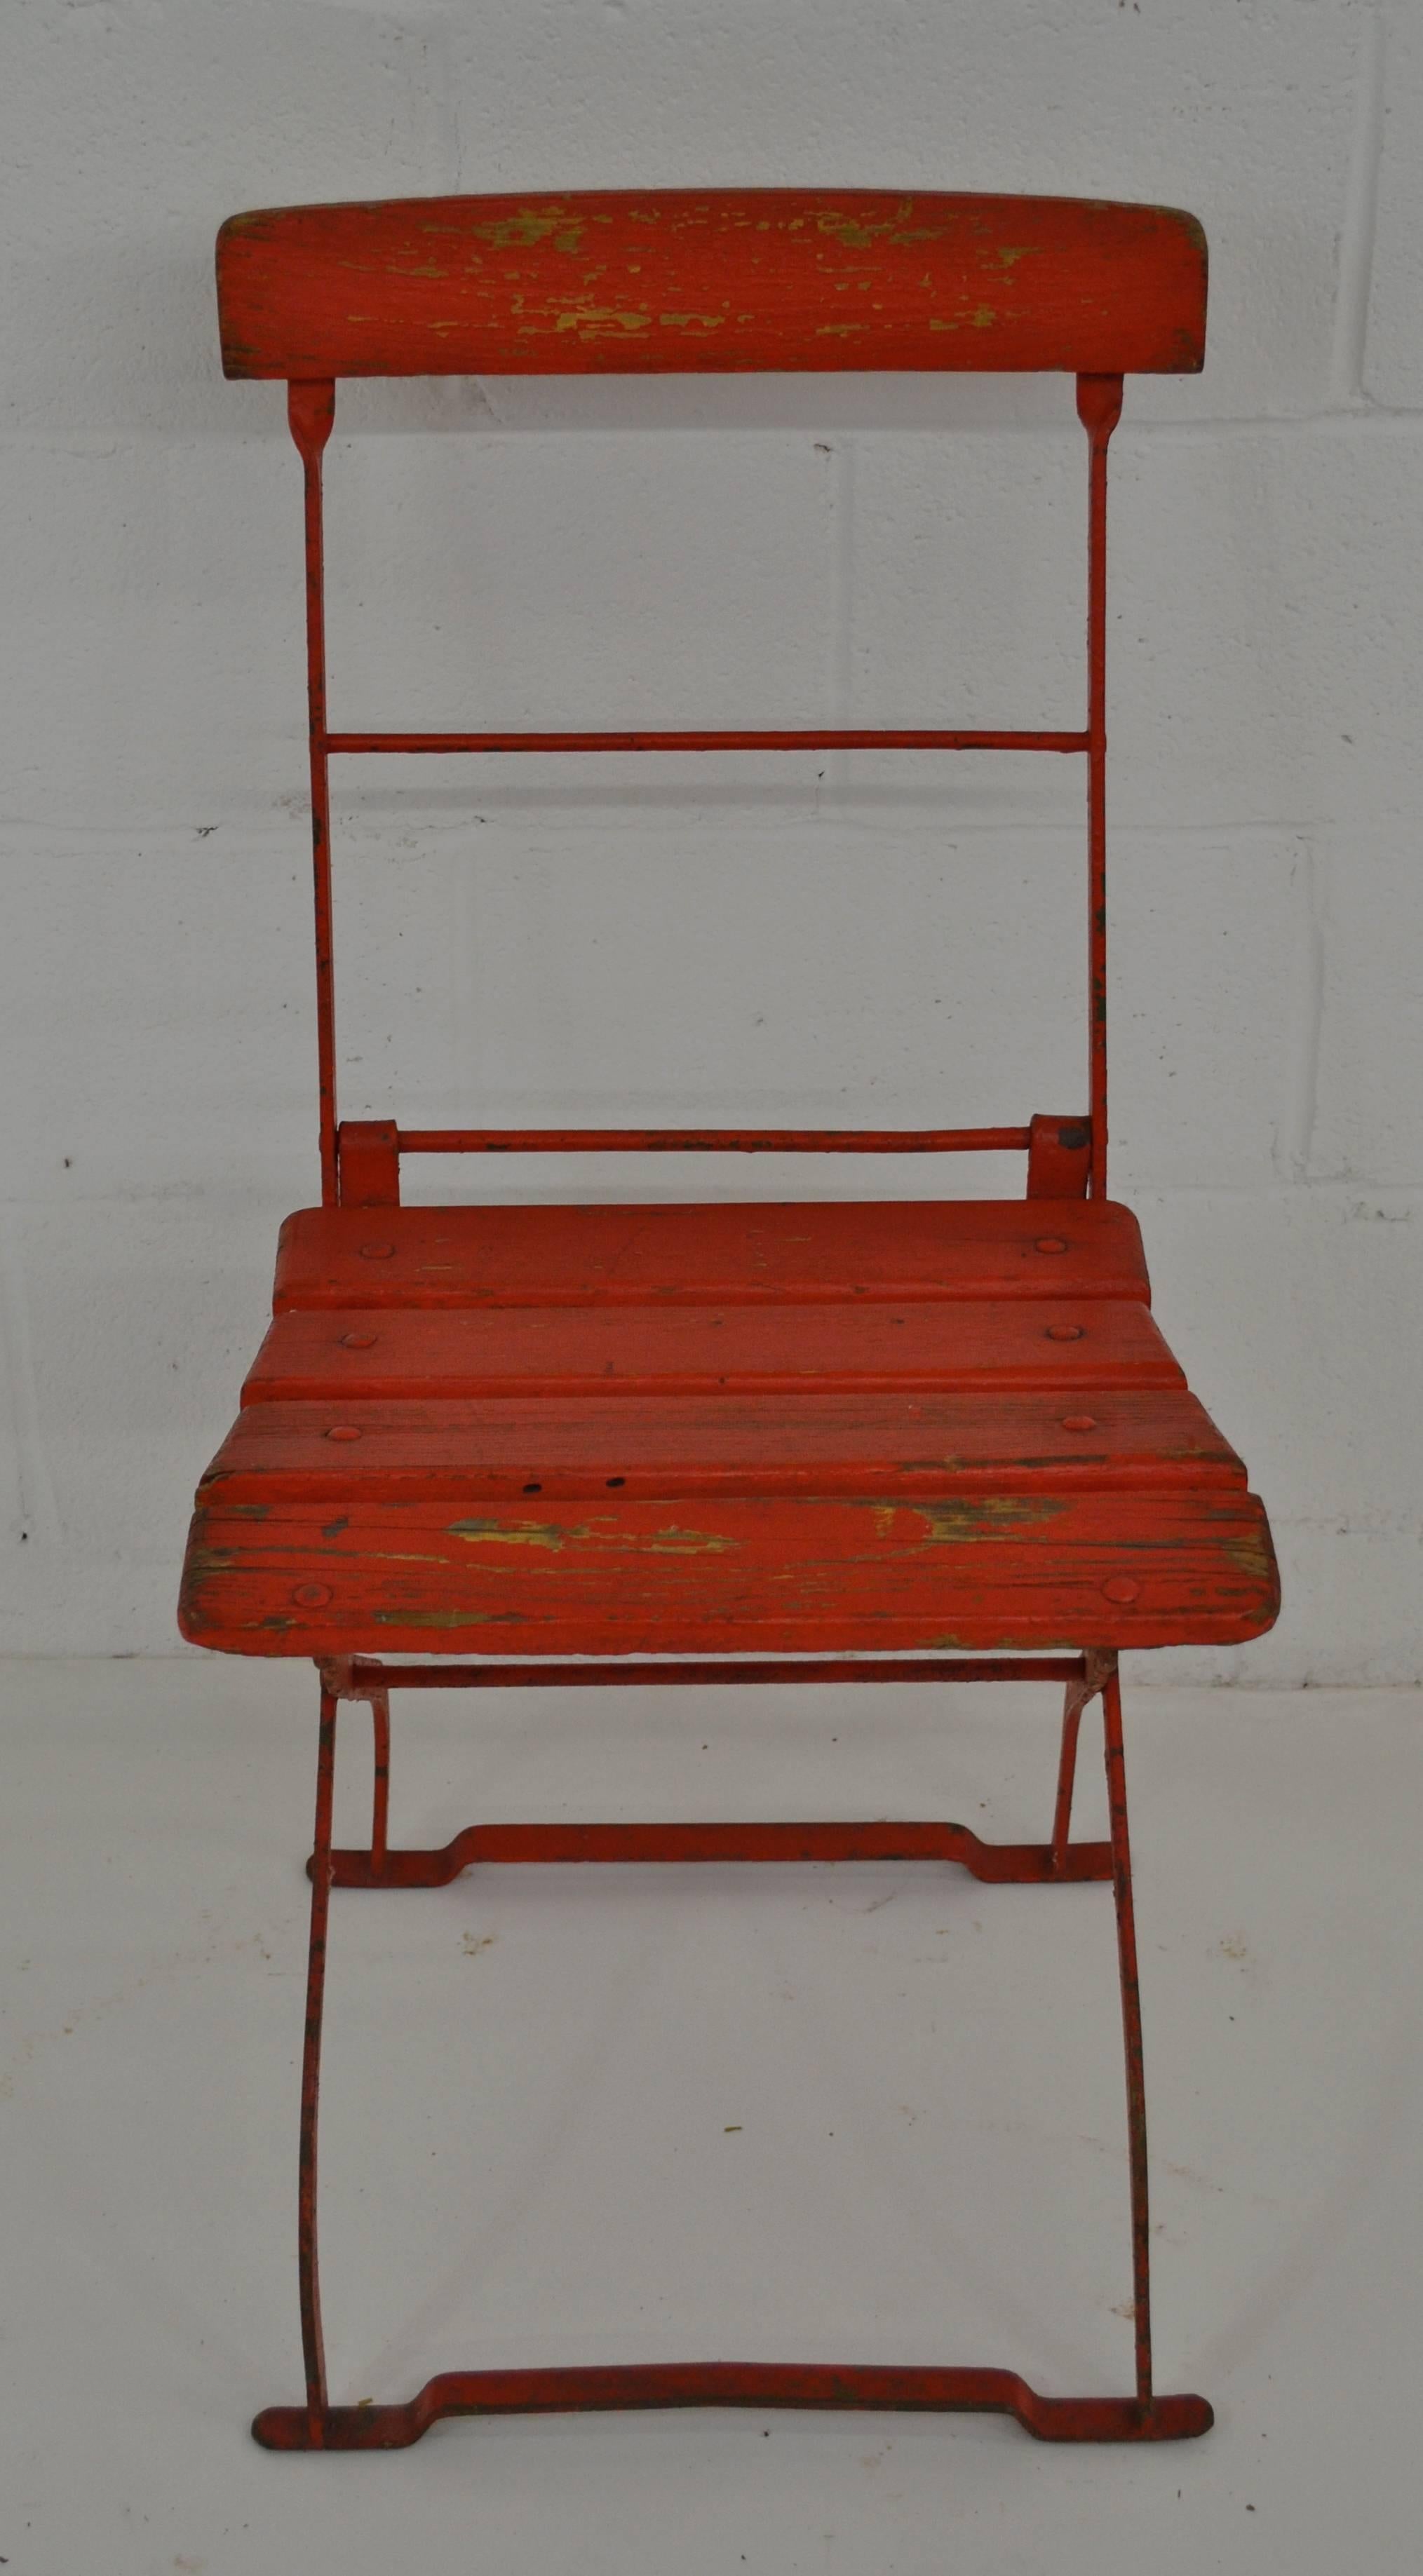 A wrought iron folding bistro chair with oak back rail and seat slats, by F. Schmidt of Elsterberg, Germany. In old very worn red paint on original green.